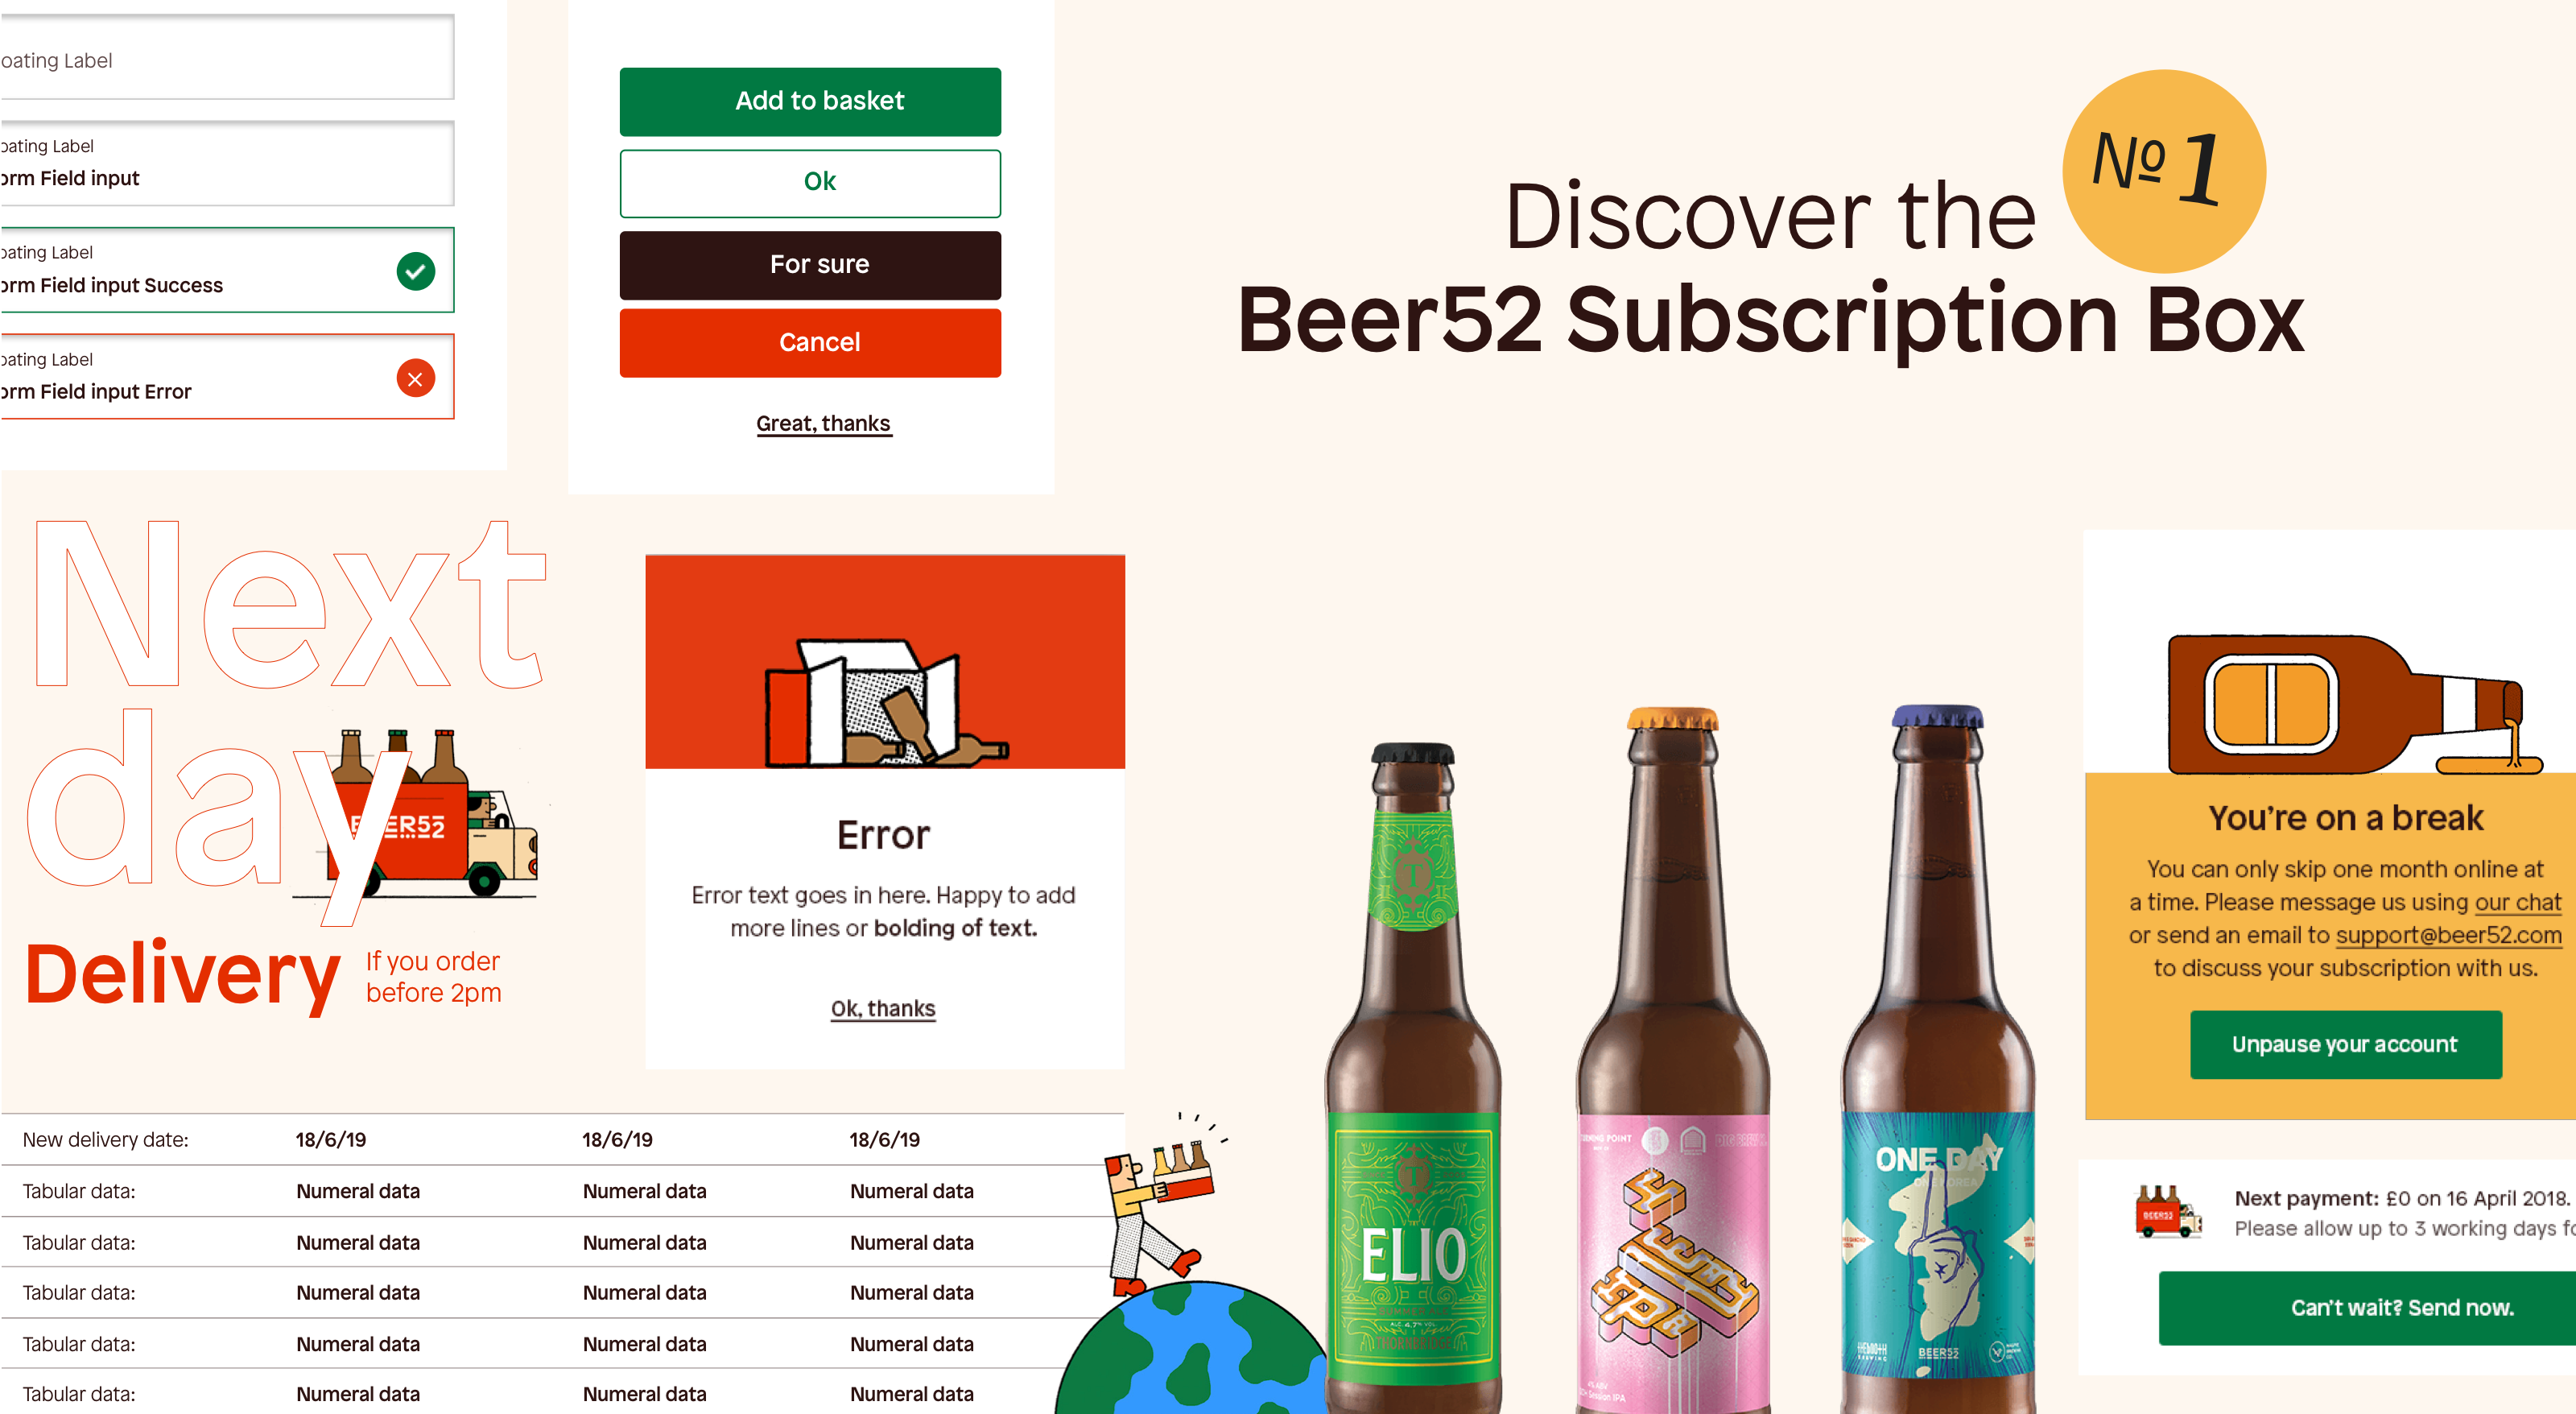 A montage of various screens for Beer52, illustrations and three beer bottles with the text “Discover the No 1 Beer52 Subscription Box”